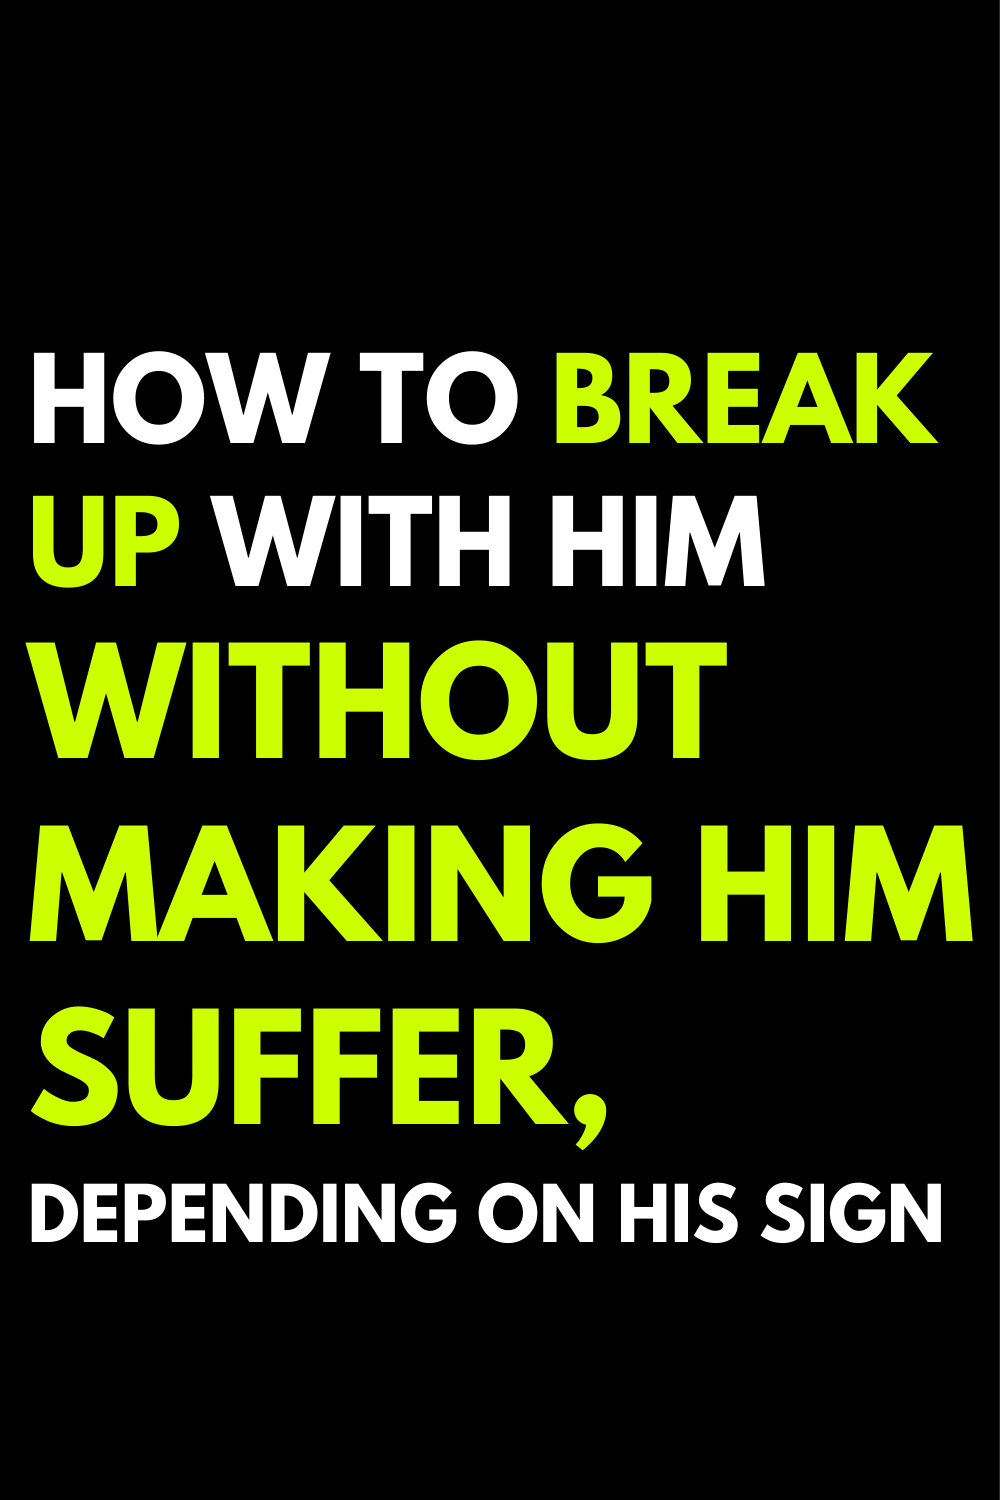 How to break up with him without making him suffer, depending on his sign